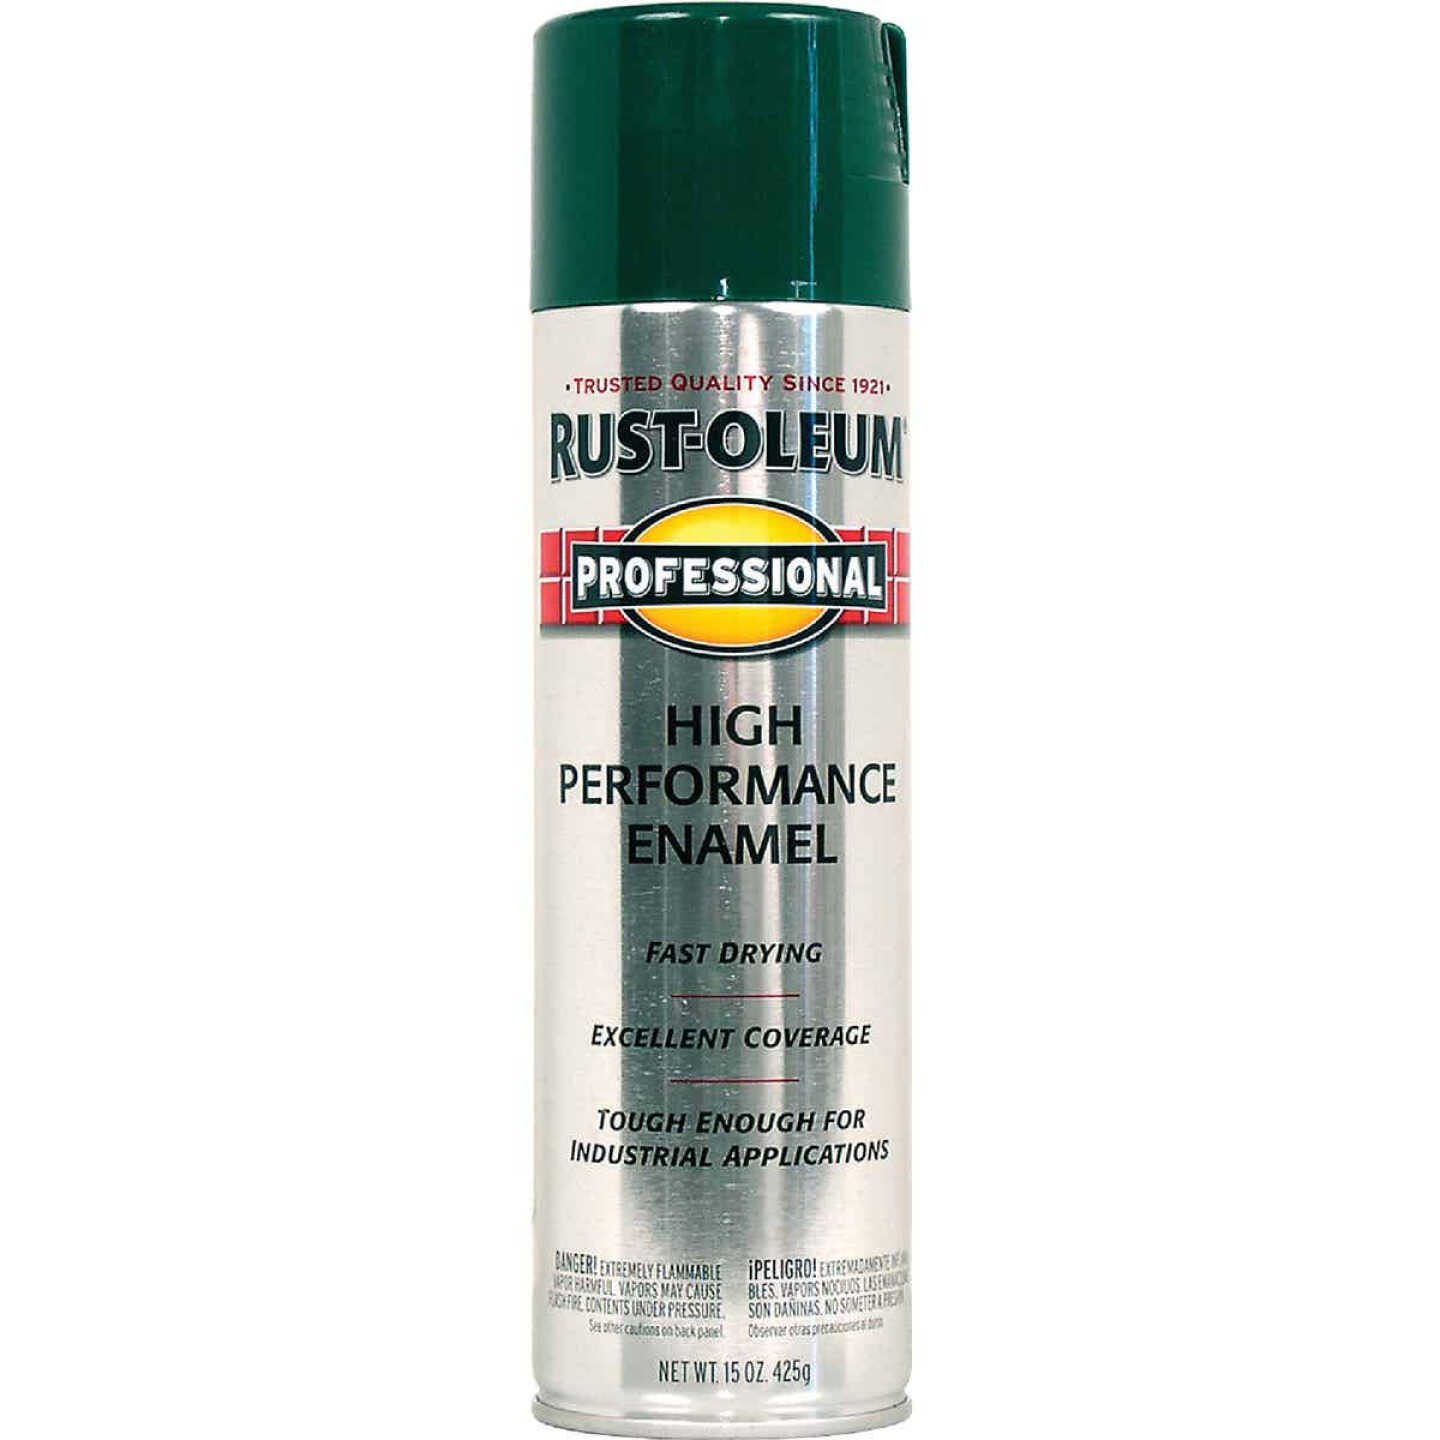 Rust-Oleum Enamel Spray Paint: Tan, Gloss, 15 oz - Outdoor, Use on Equipment, General Plant Maintece, Handrails, Machinery & STRUCTURAL Steel, 50 to